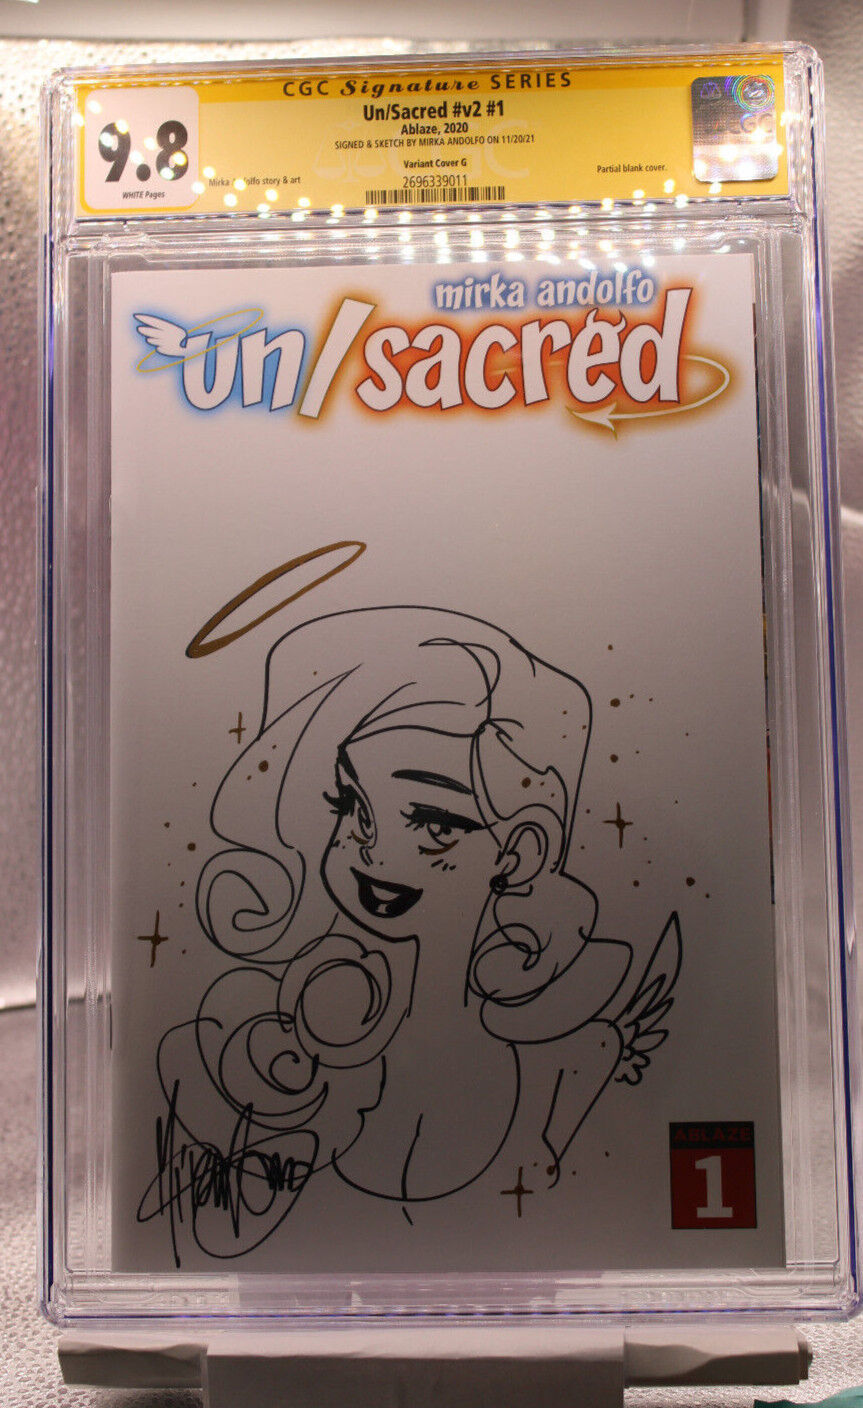 UN/SACRED v2 #1 BLANK COVER SKETCH CGC SS 9.8 SS SKETCHED BY MIRKA ANDOLFO